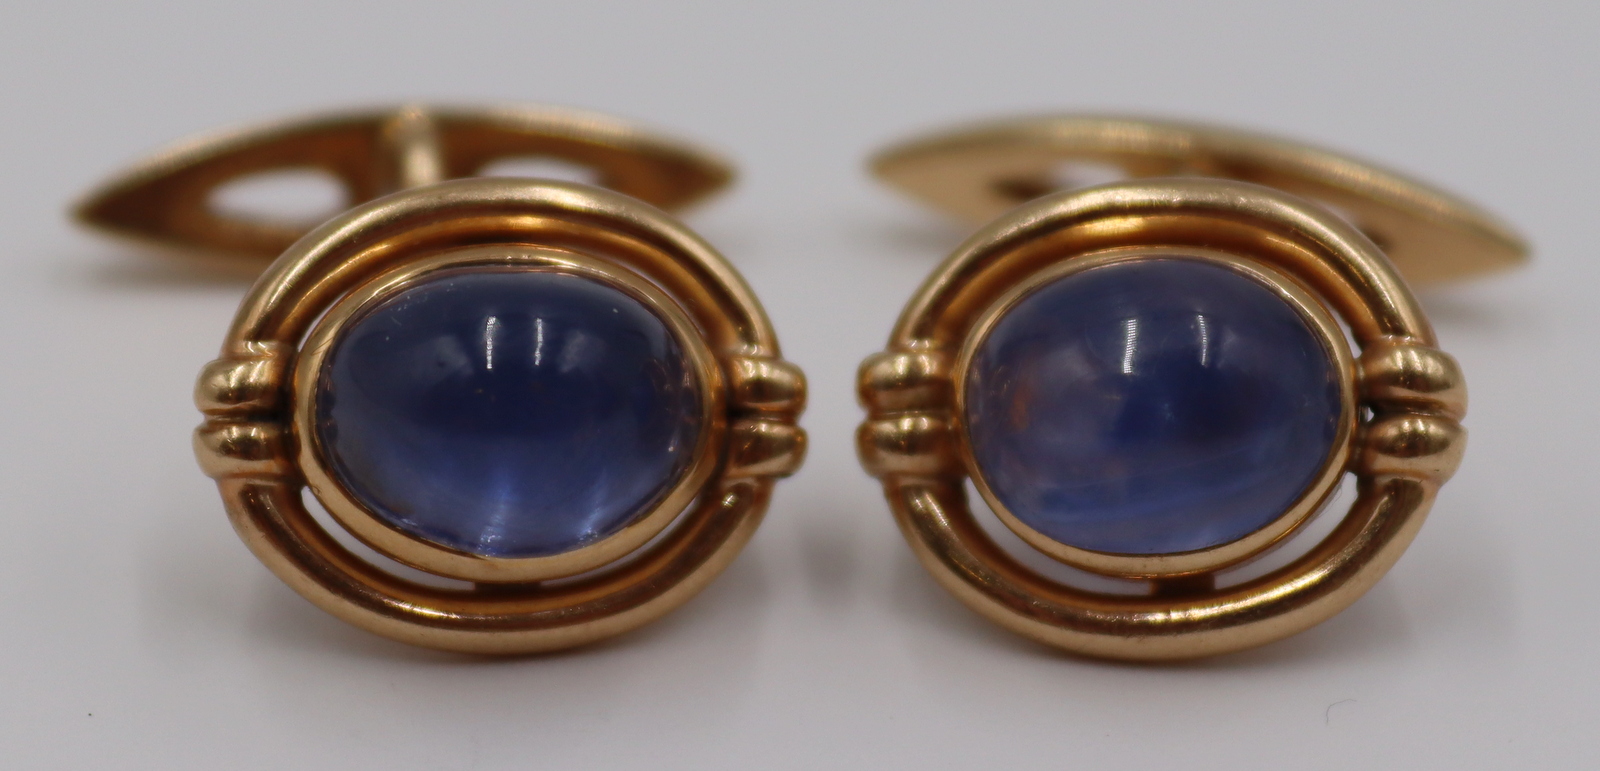 JEWELRY. PAIR OF 14KT GOLD COLORED